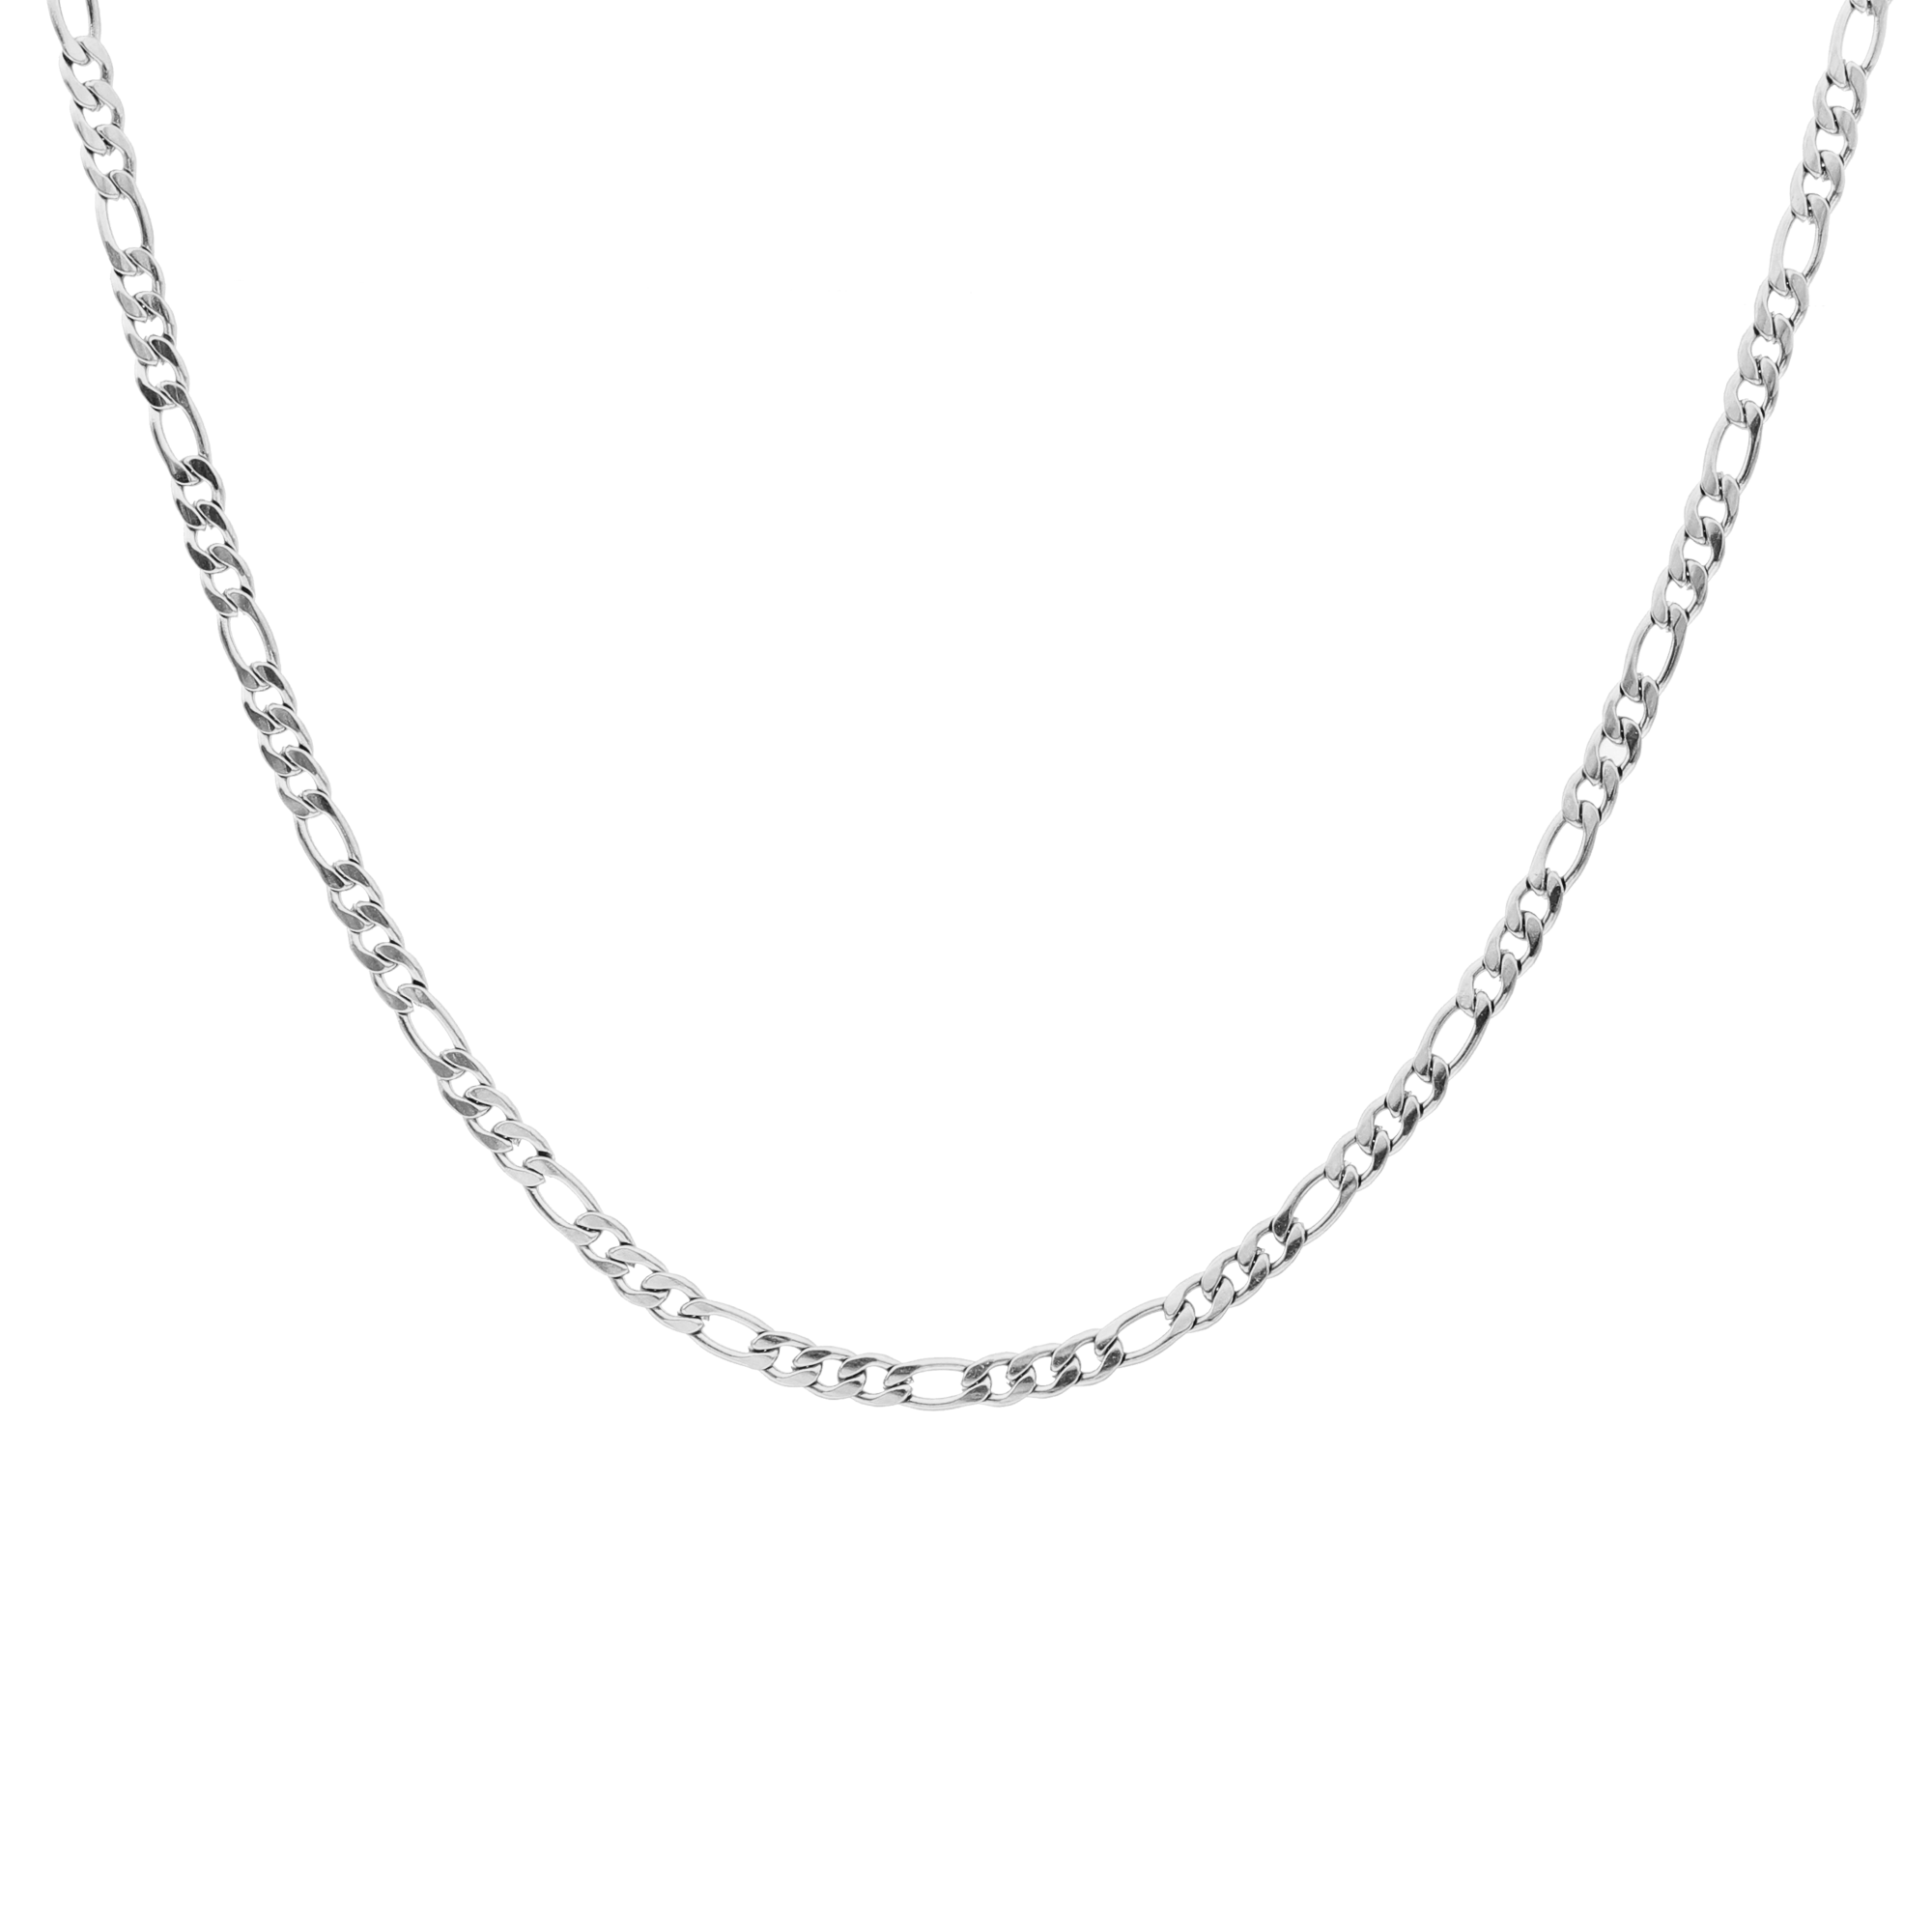 Rhône men's necklace by Five Jwlry, crafted from a 4mm figaro chain in silver-colored, water-resistant 316L stainless steel. Available in sizes 45cm, 55cm, and 65cm. Hypoallergenic with a 2-year warranty.